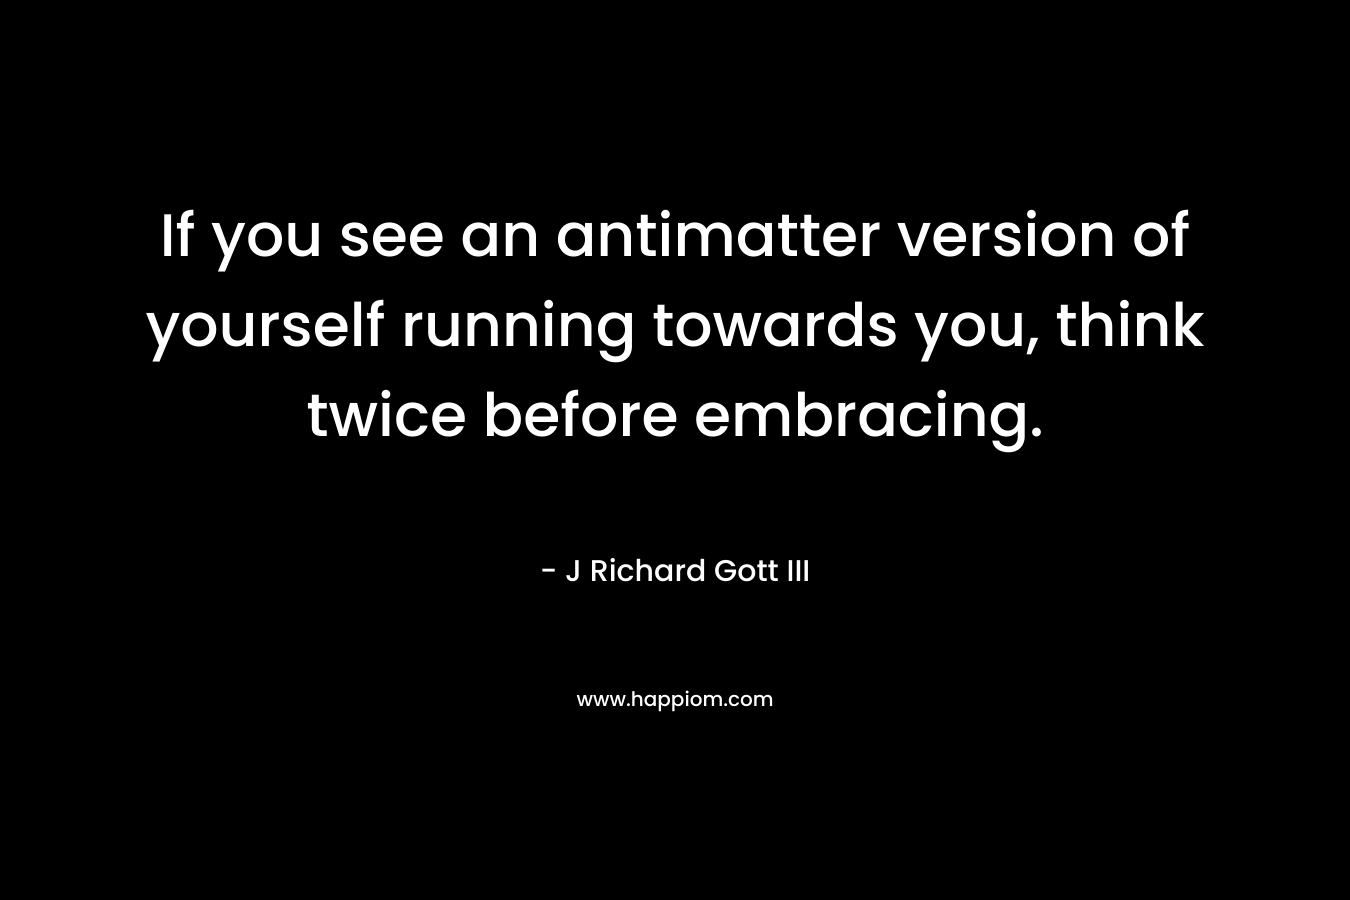 If you see an antimatter version of yourself running towards you, think twice before embracing. – J Richard Gott III